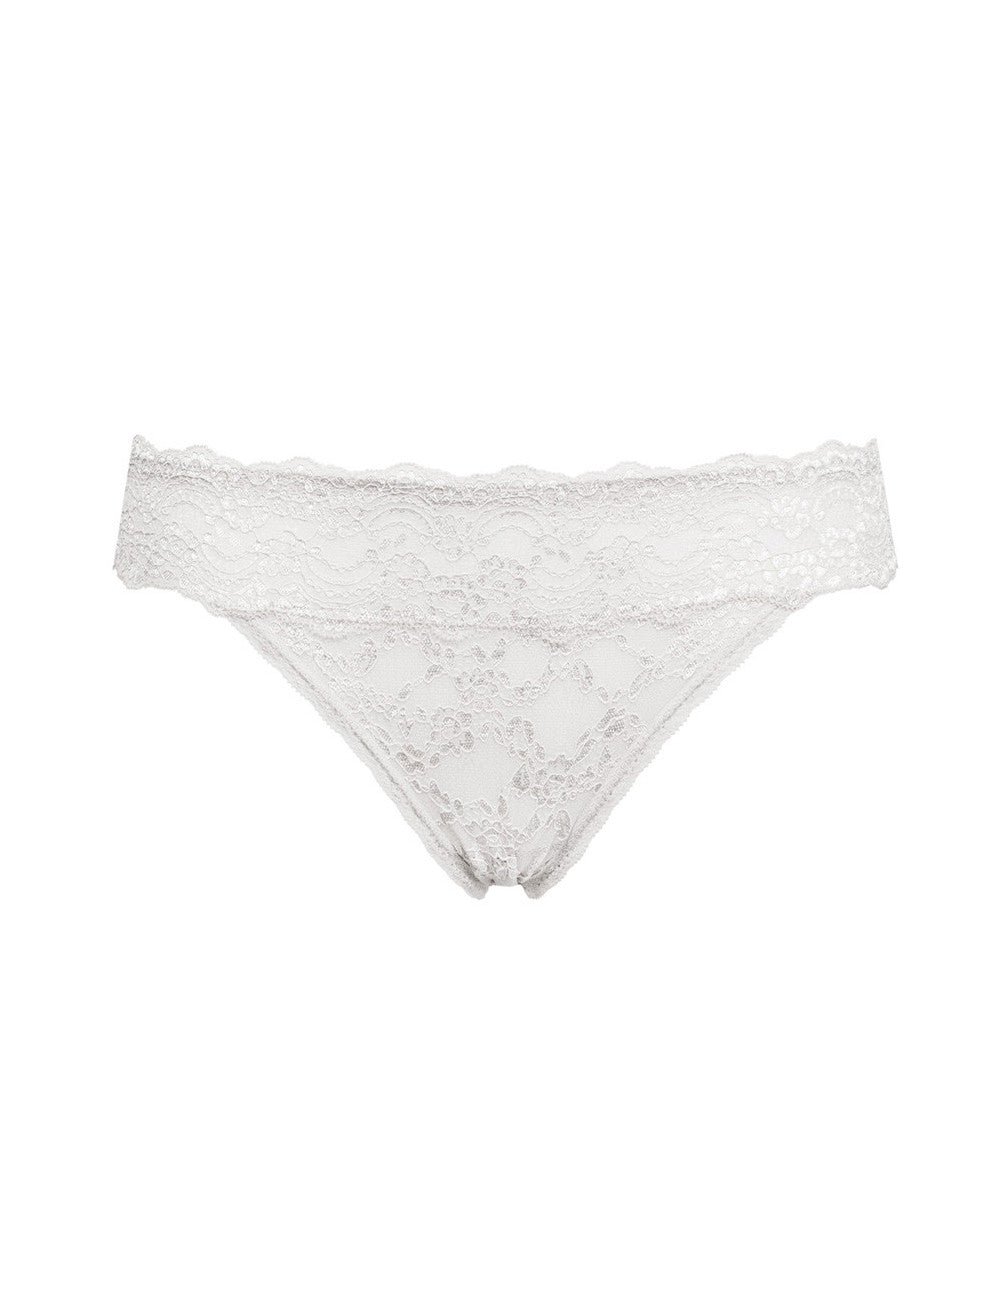 This brief from the Vanity line by SIeLEI italy offers a lightweight and comfortable design.